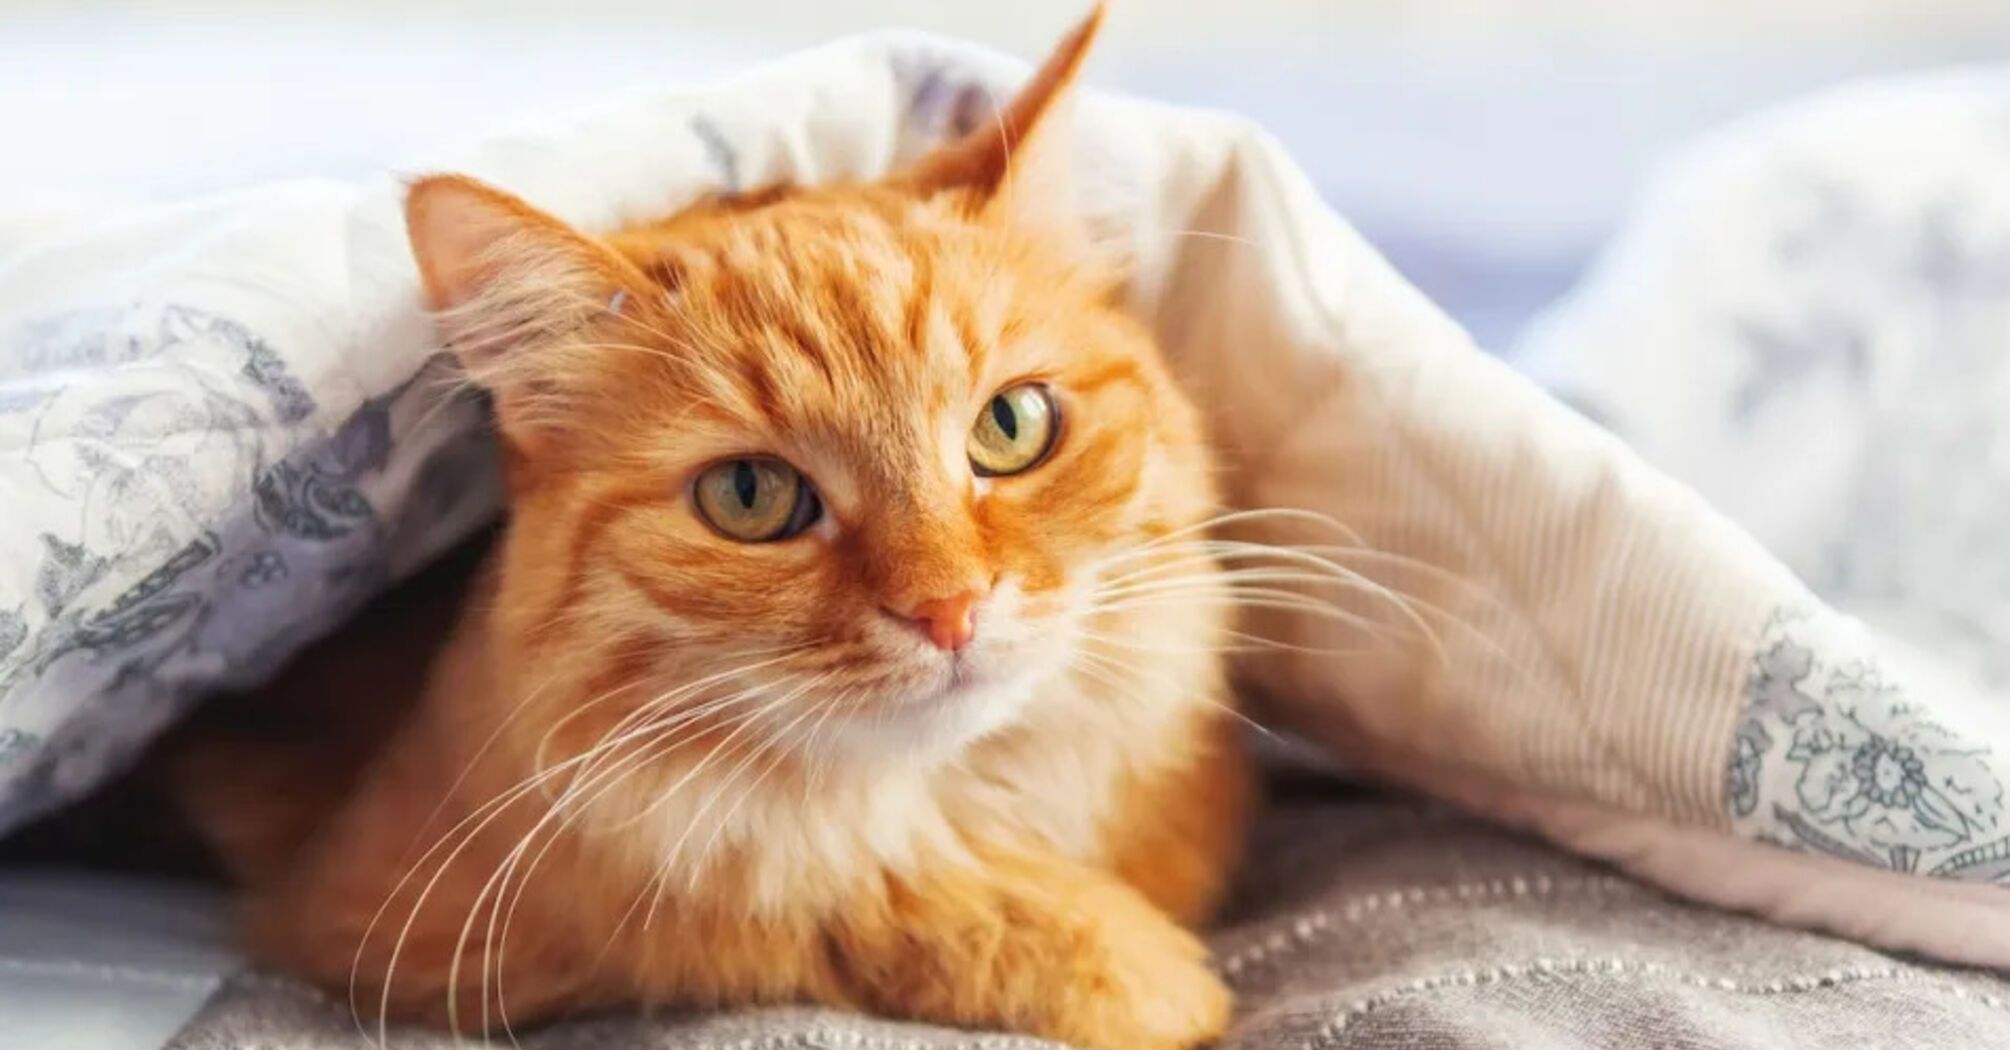 How the red color of fur affects a cat's behavior